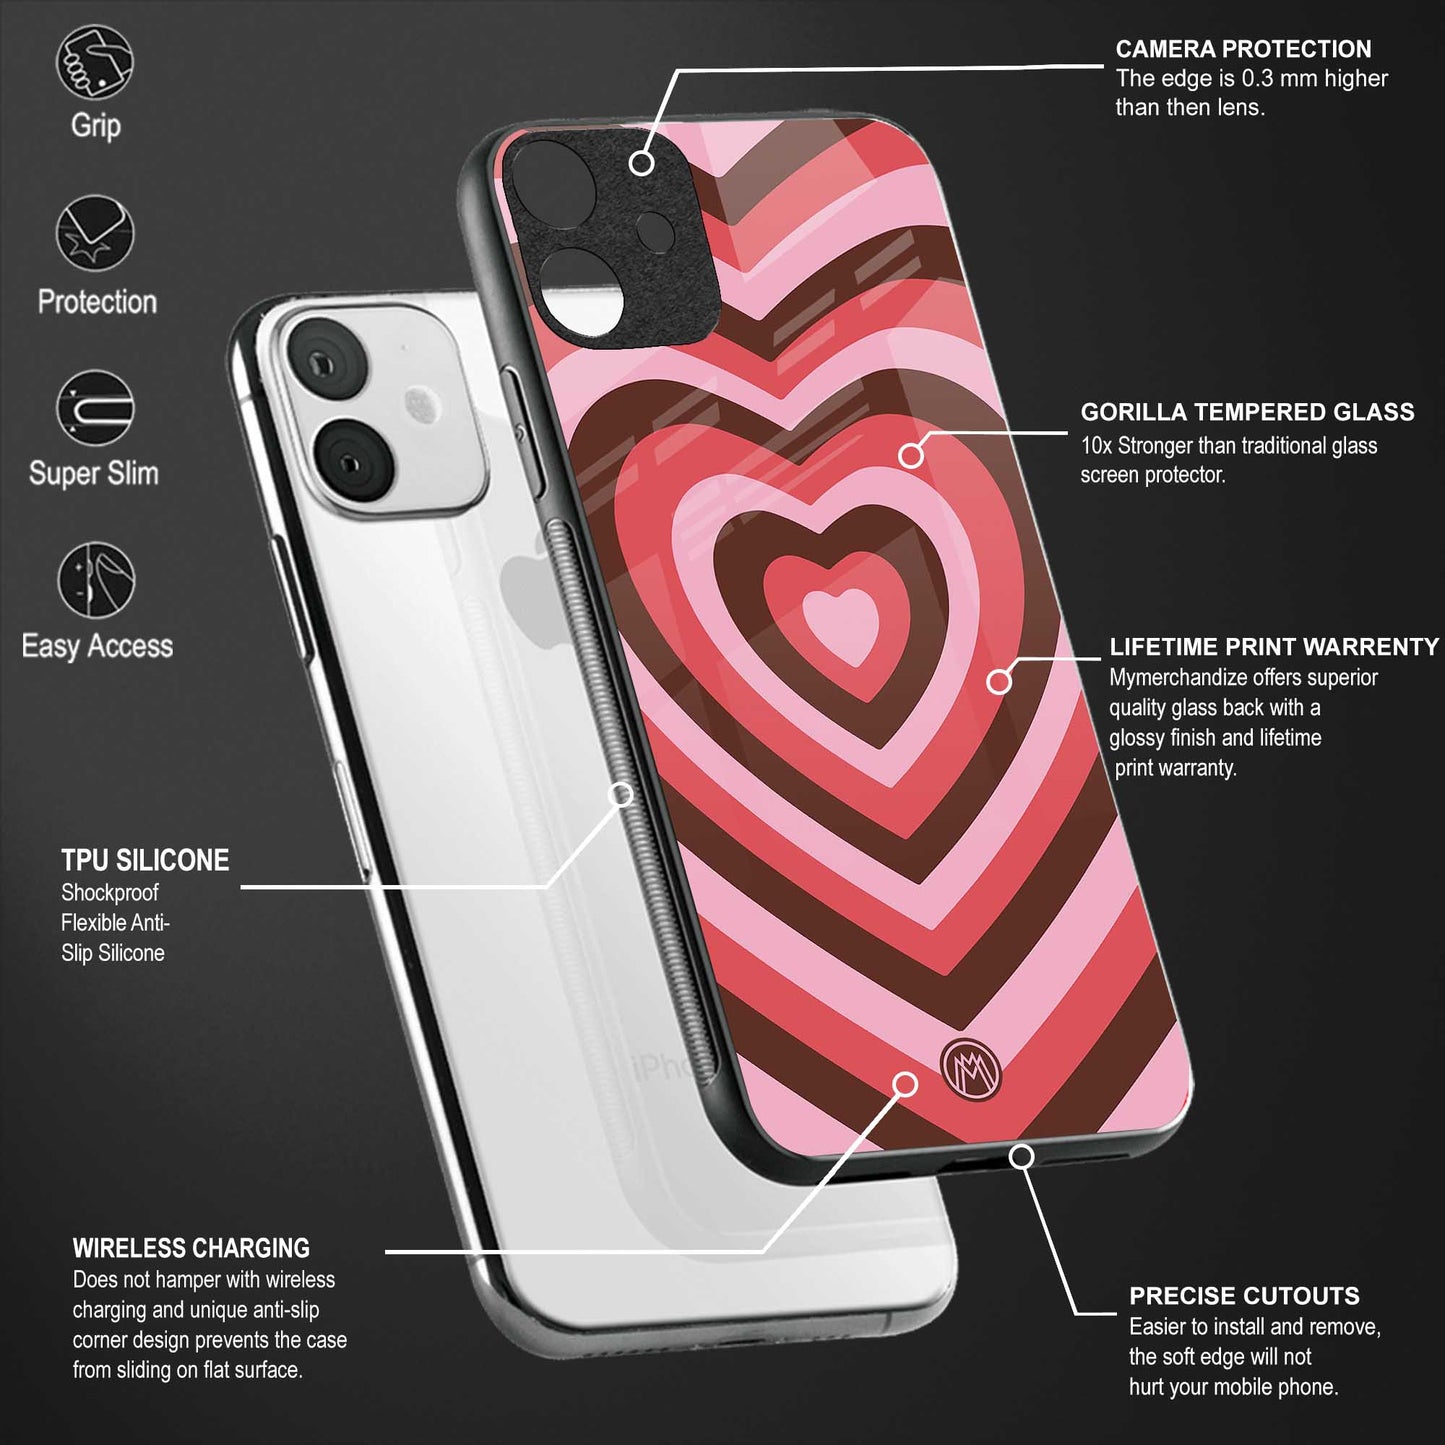 y2k red pink brown hearts aesthetic back phone cover | glass case for samsung galaxy m33 5g